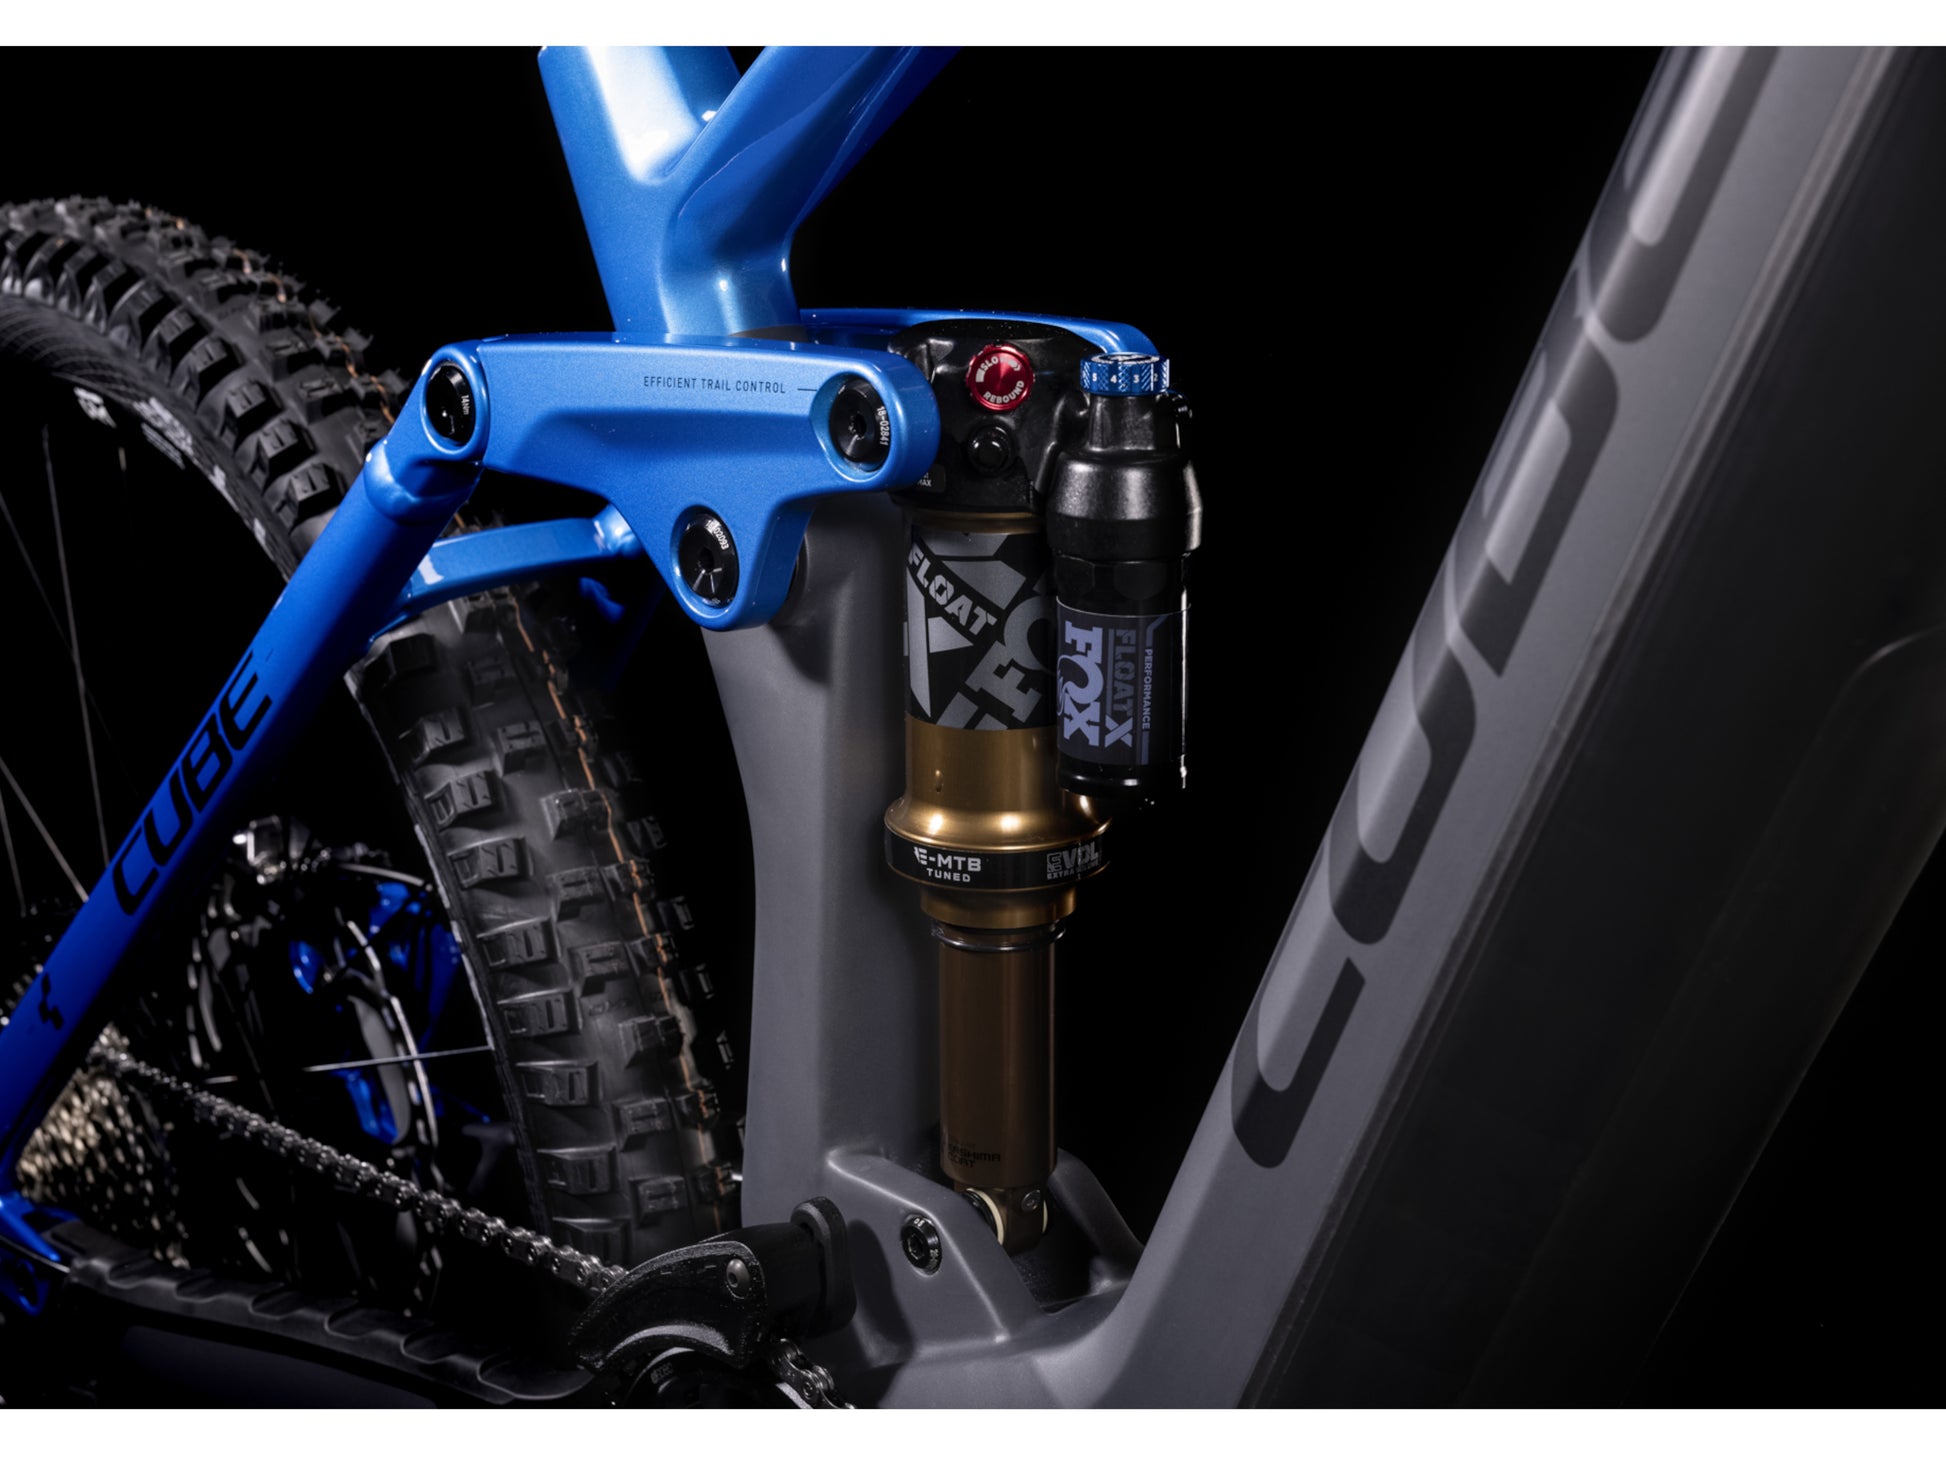 Cube Stereo Hybrid 160 HPC Actionteam 750 eMTB full Suspension closeup Fox Float X Factory rear shock triangle